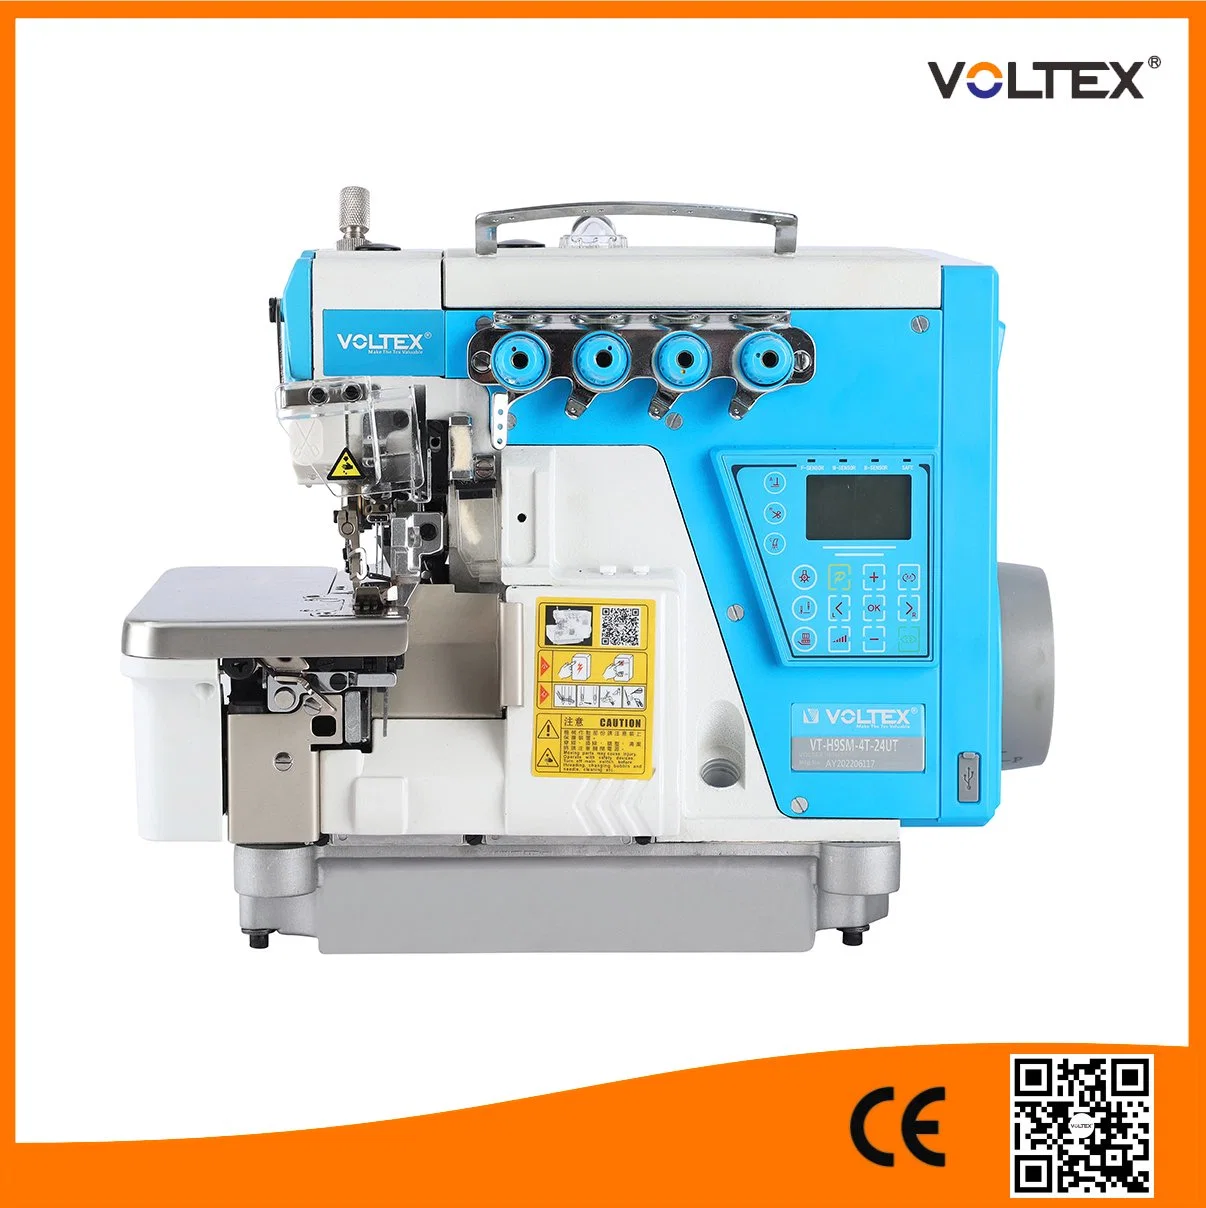 Voltex Vt-H9sm-5t-35ut Automatic Stepping Motor Overlock Sewing Machine